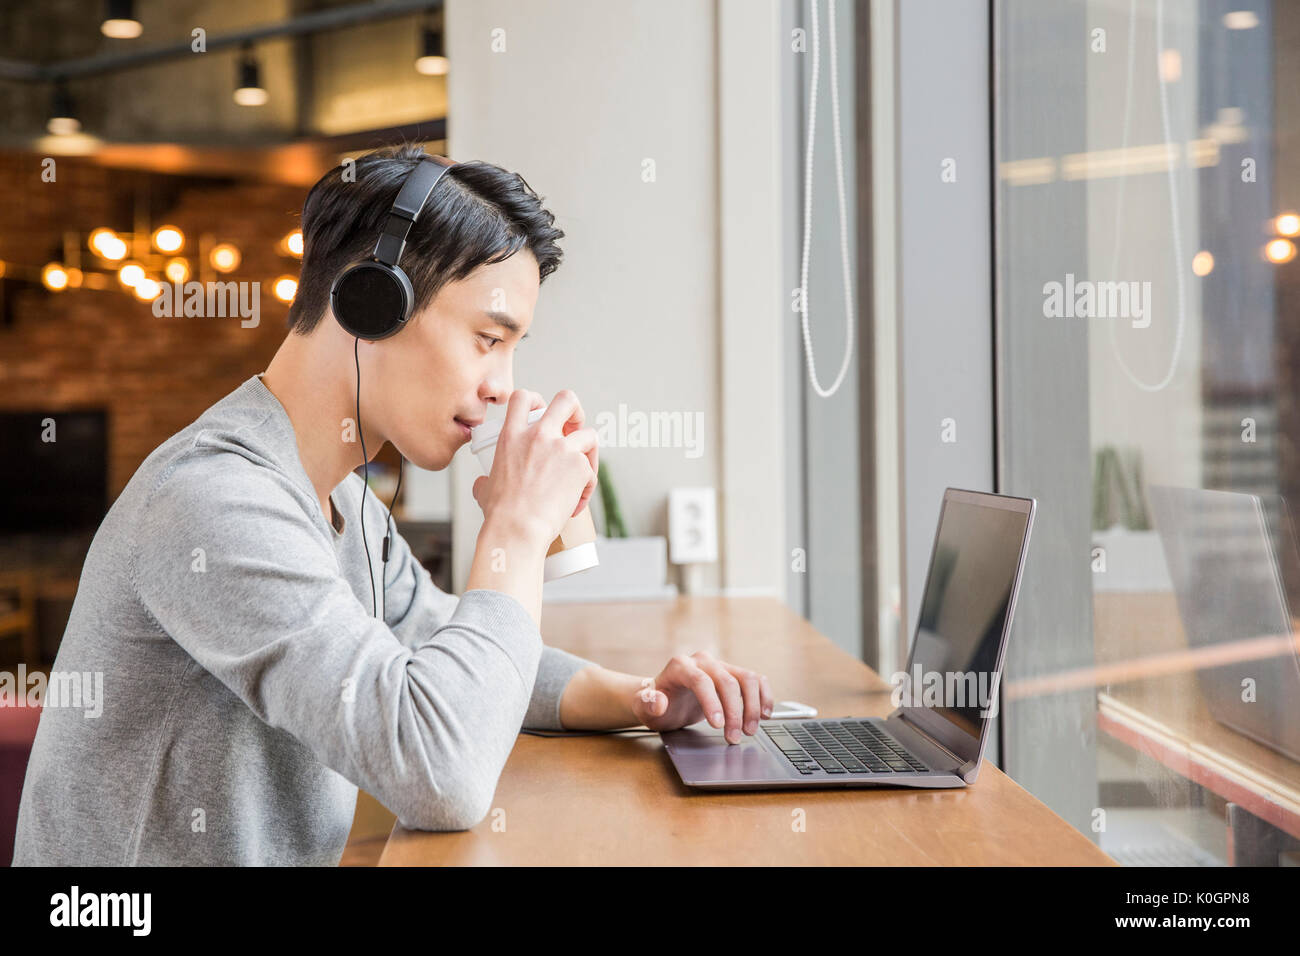 Side view portrait of young businessman with headphones using a notebook computer at cafeteria Stock Photo